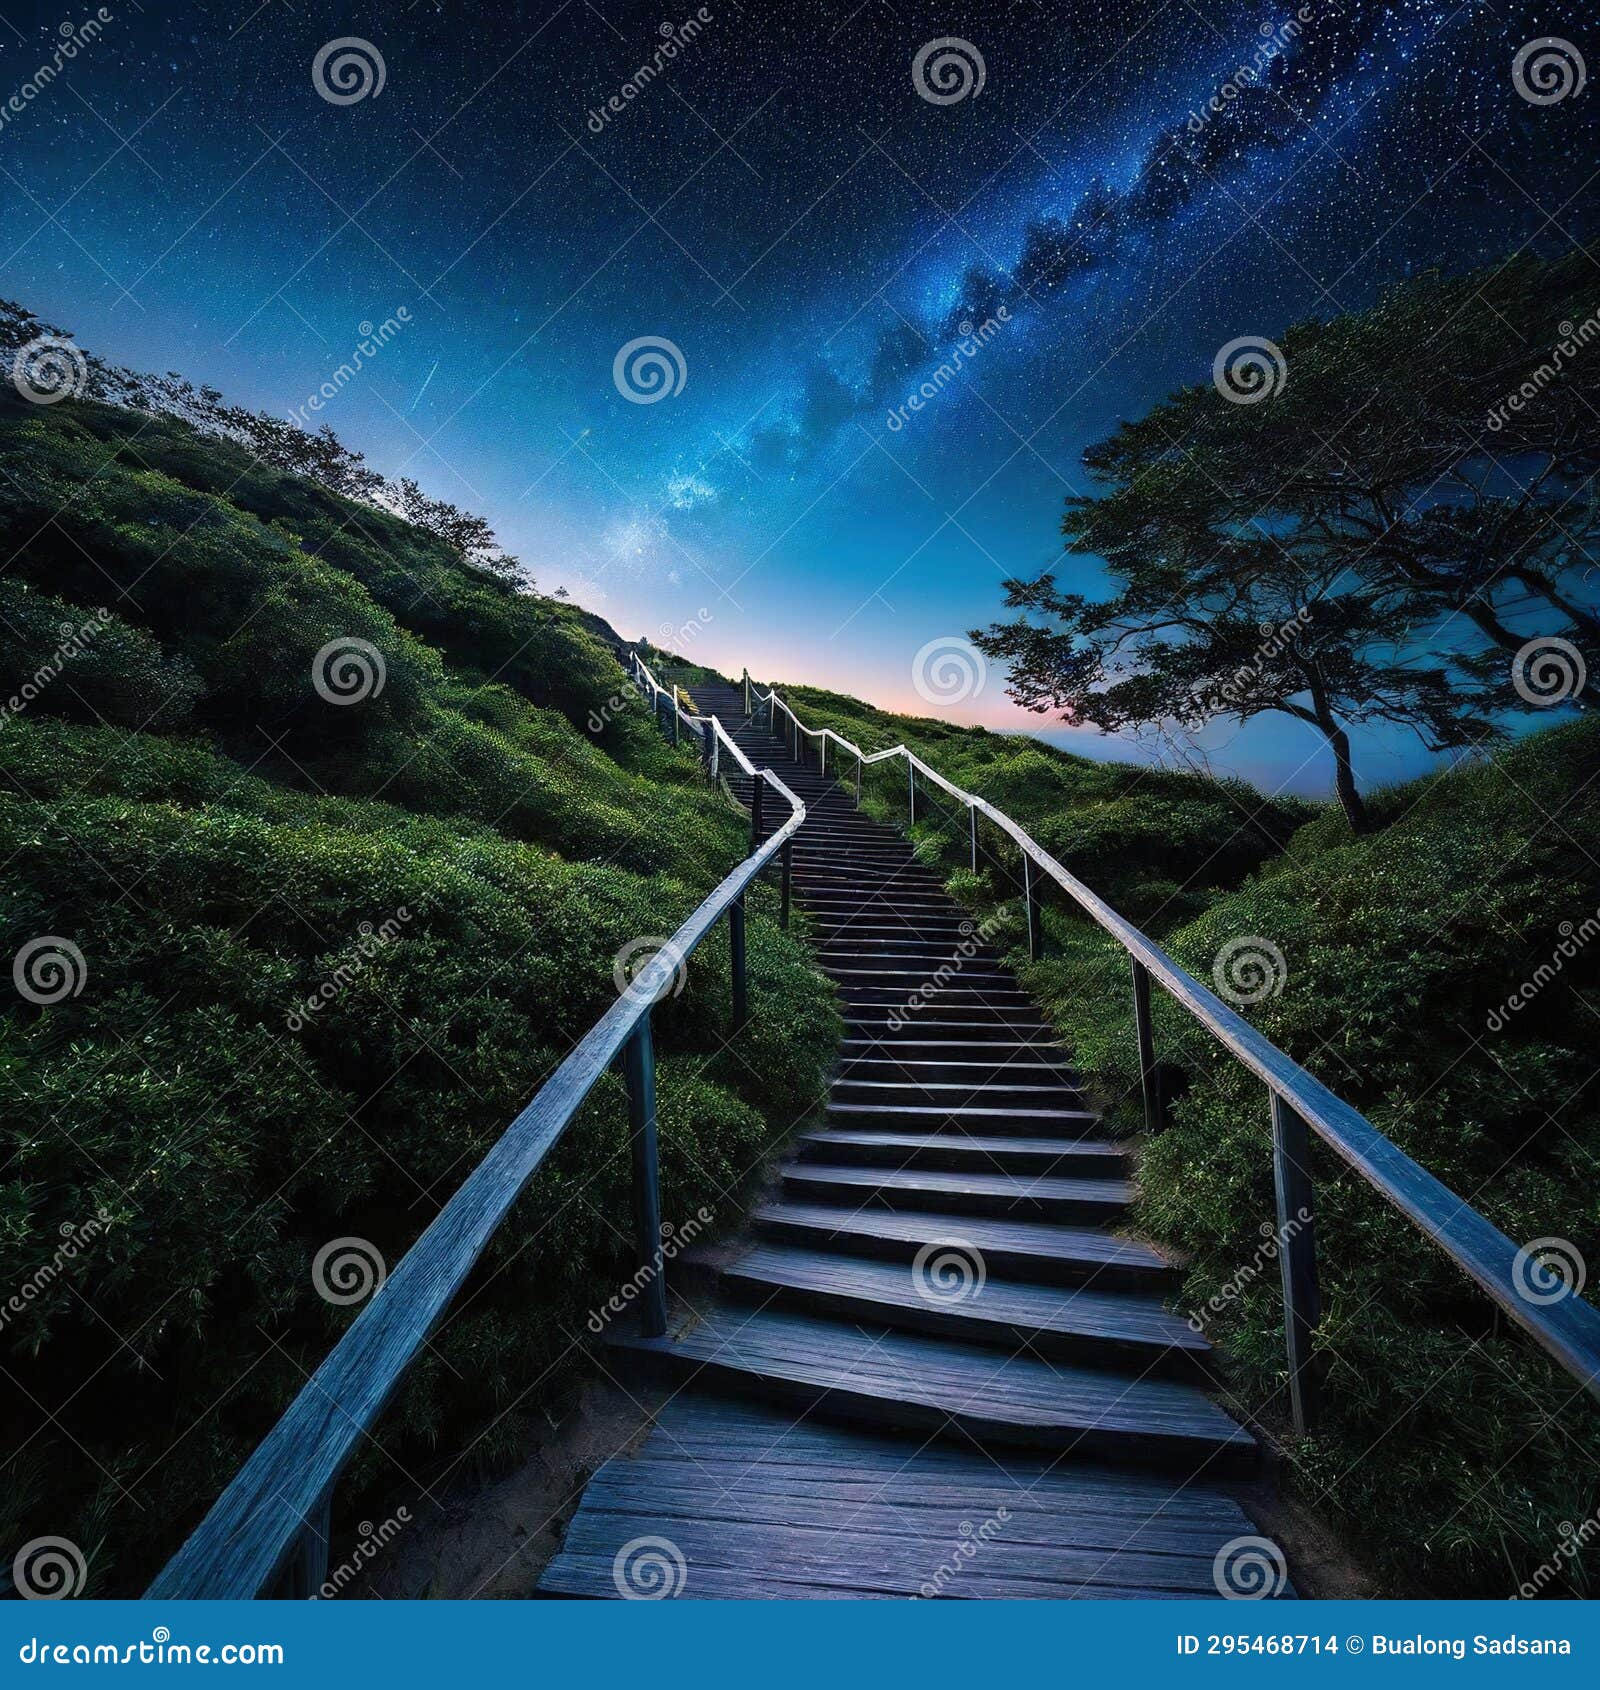 aof stairs leading up to a sky filled with stars and a bright light at the top of the stairs is a stairway leading up to a dark